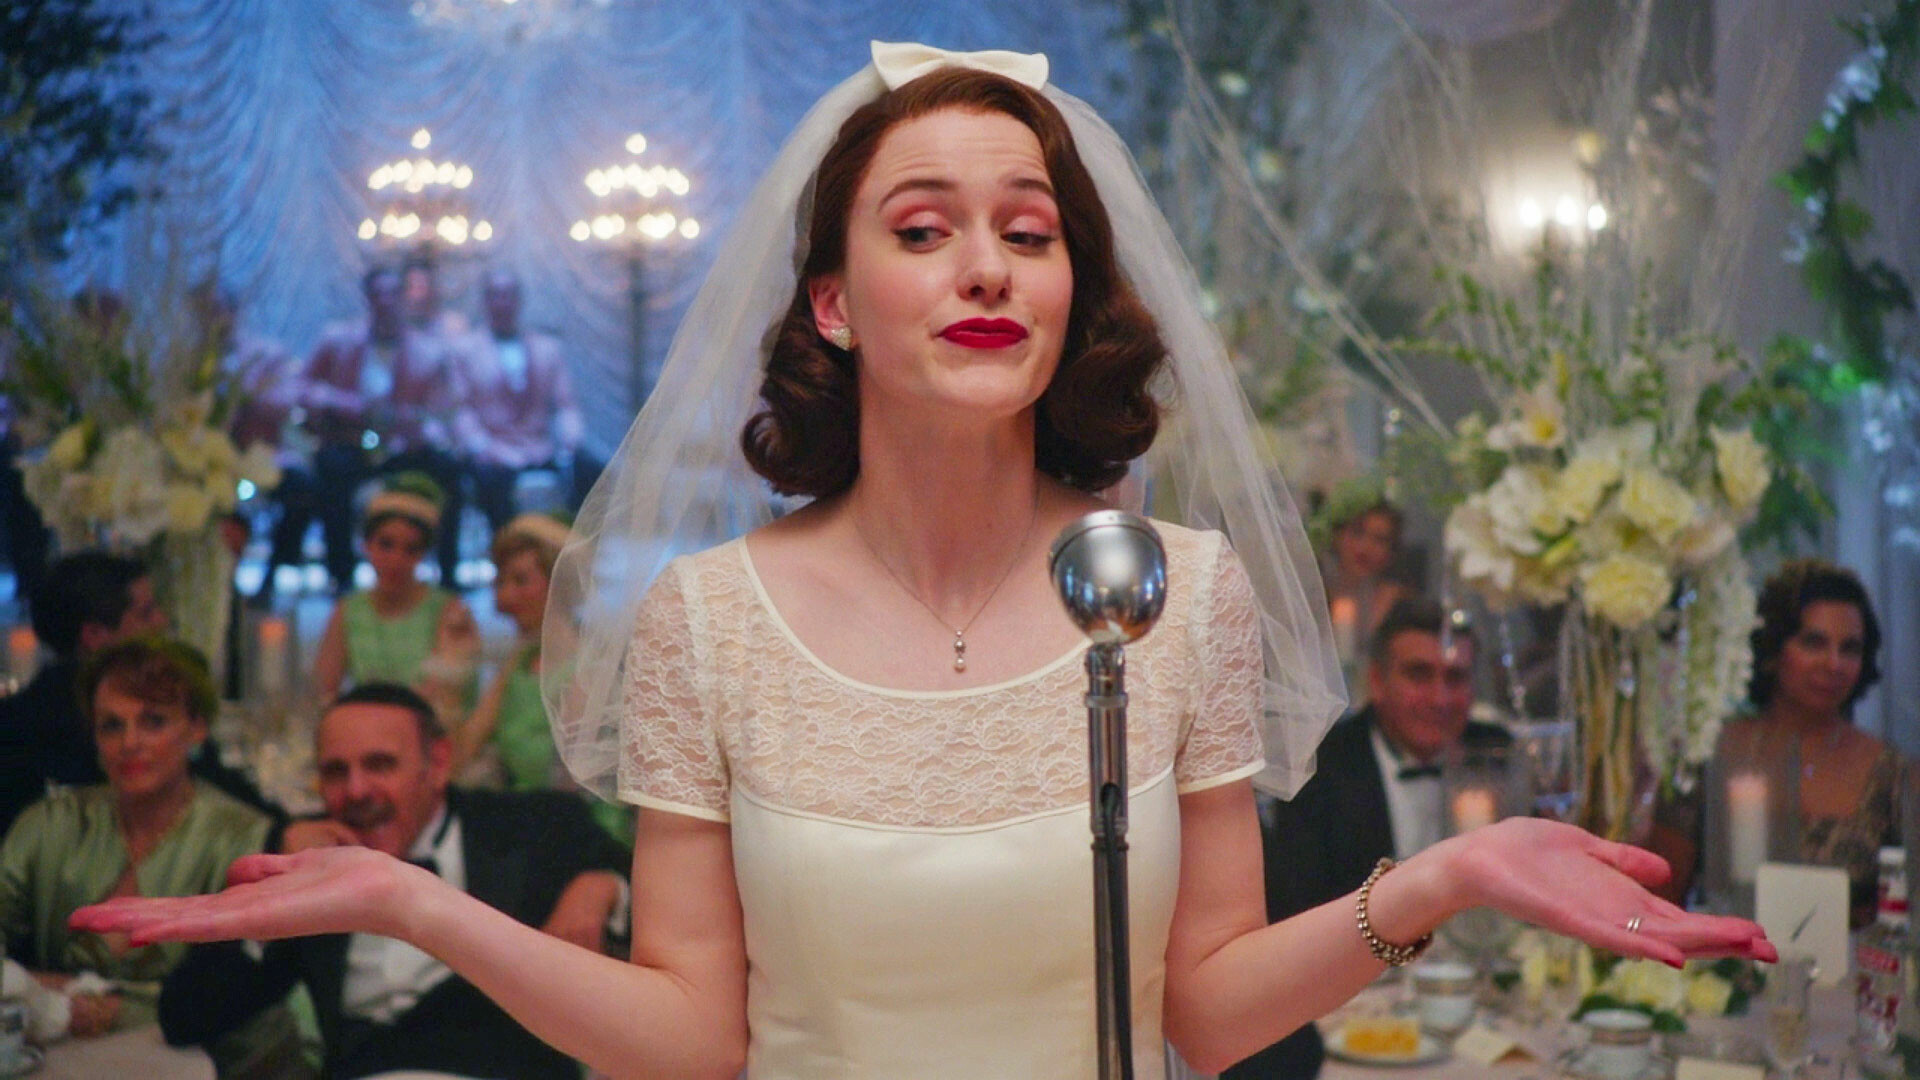 The Marvelous Mrs. Maisel: Gilmore Girls Creator, A Marvelous New Period Piece Comedy, Rachel Brosnahan. 1920x1080 Full HD Background.